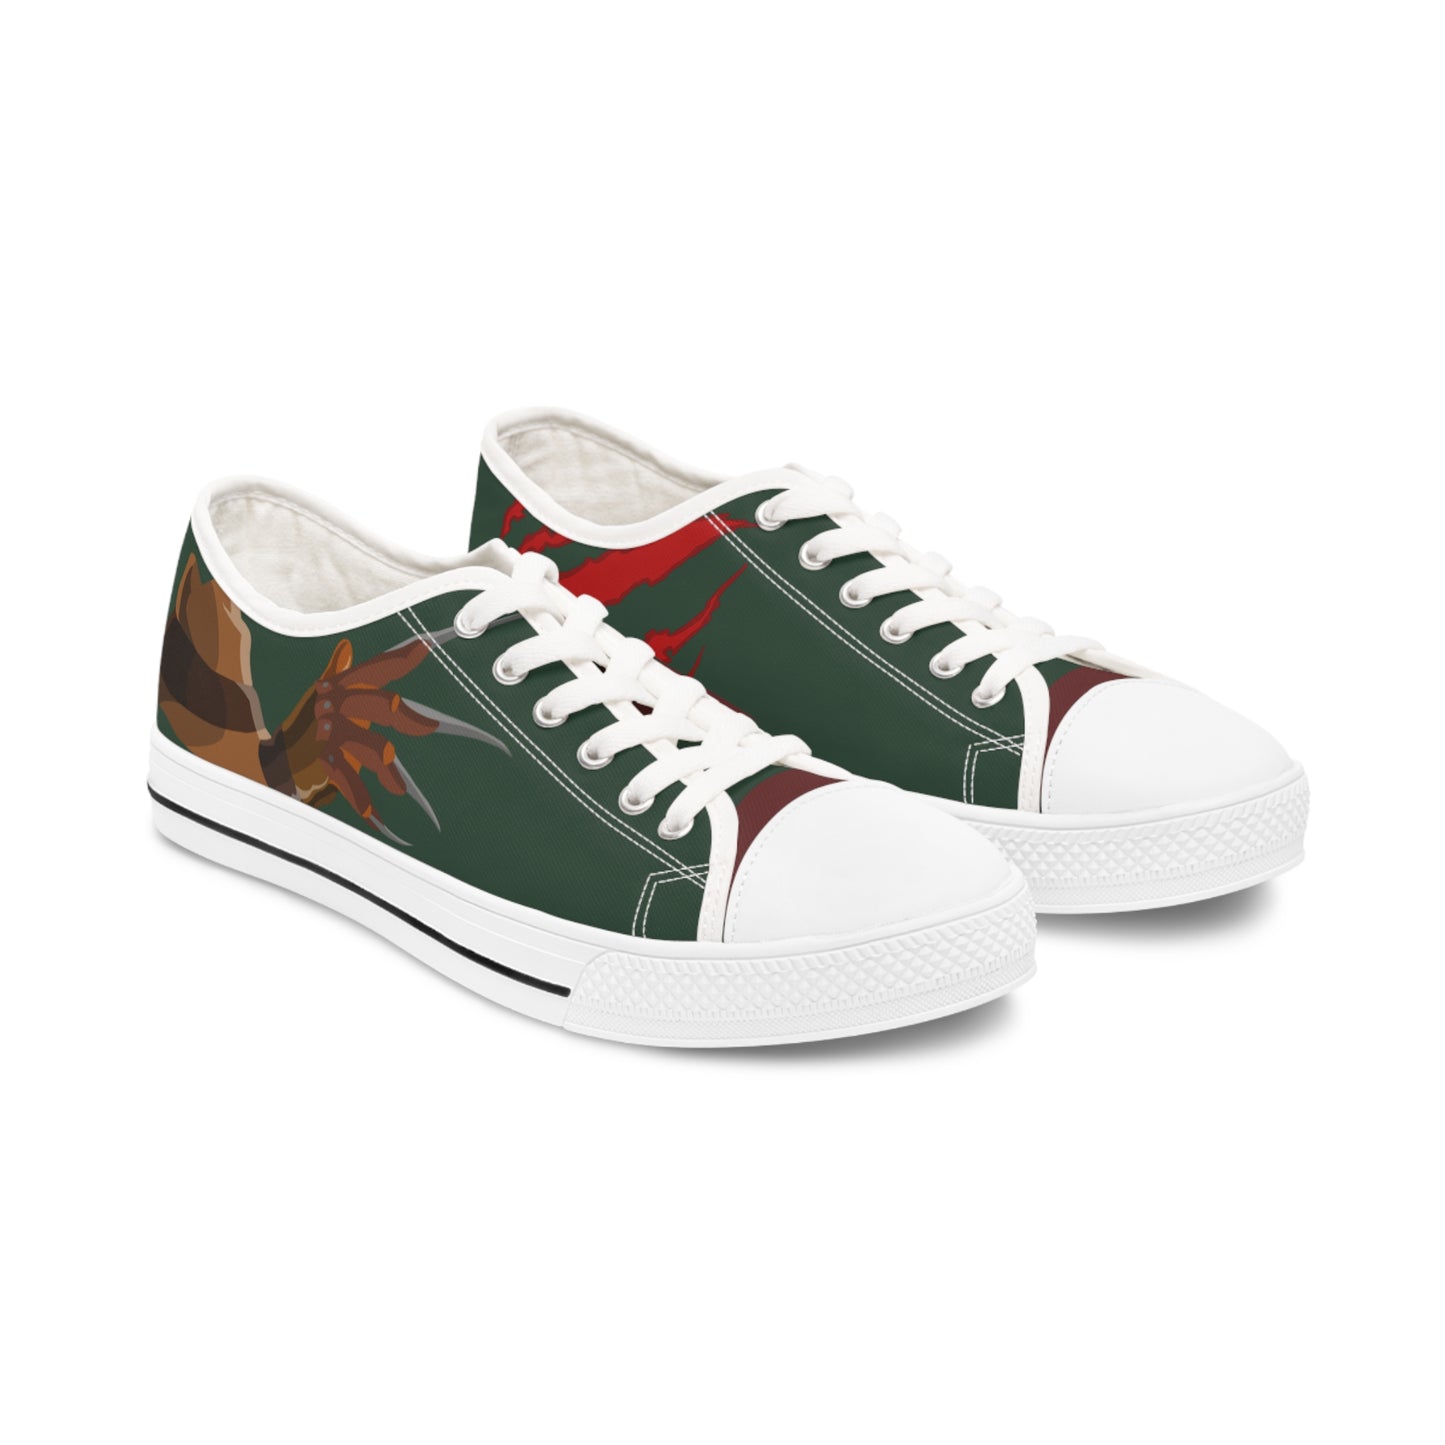 Freddy’s Coming for You Women's Low Top Sneakers